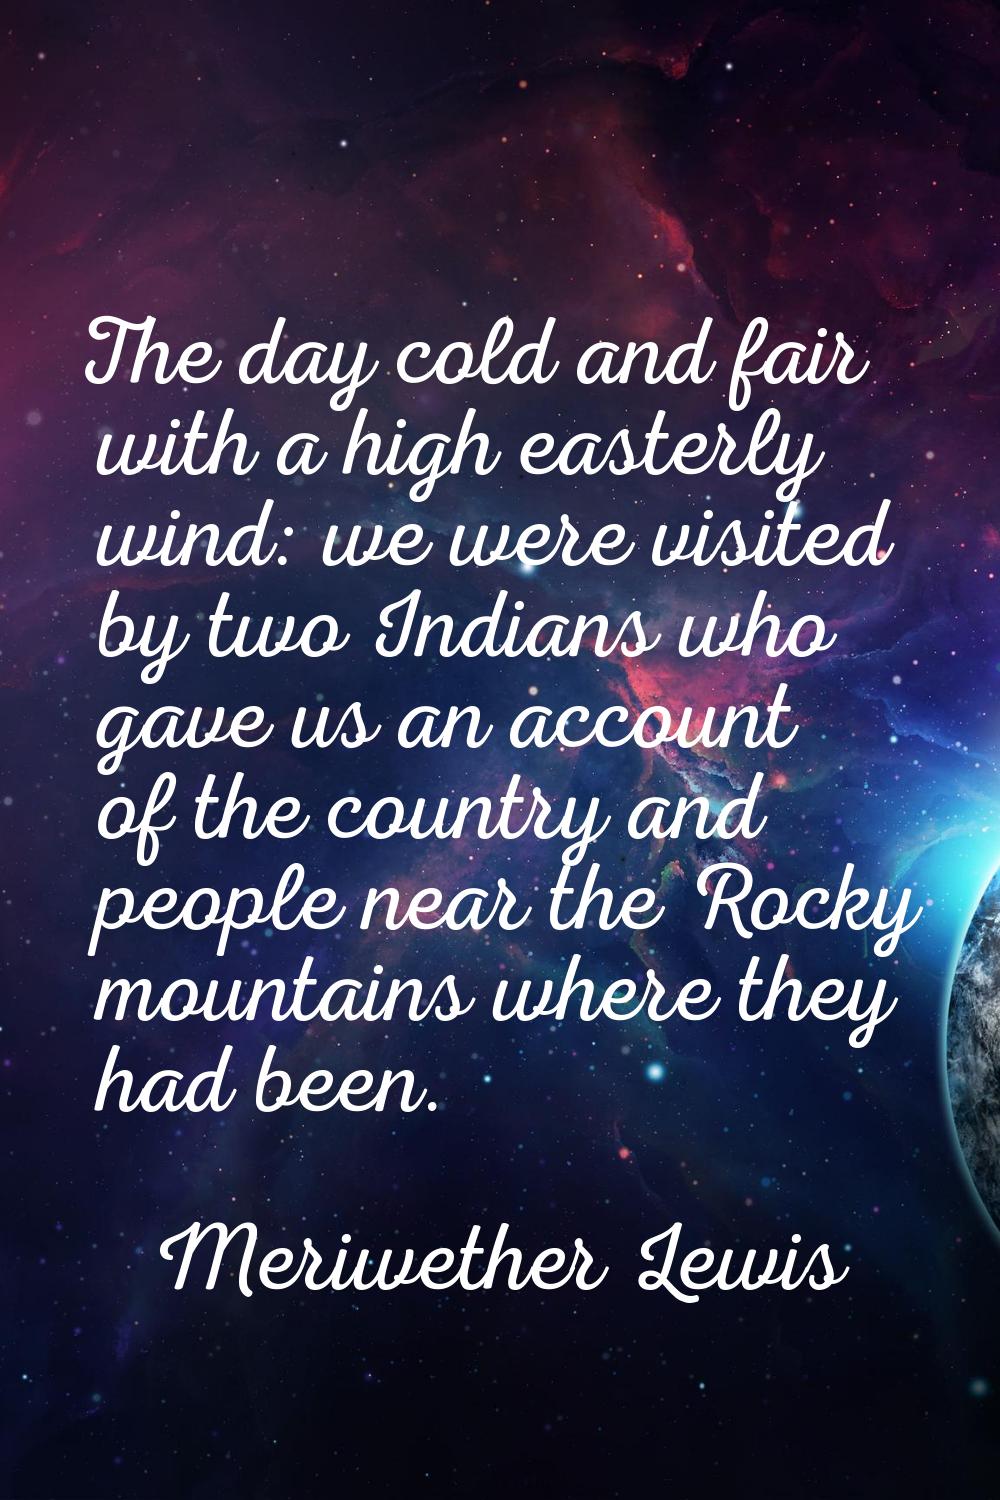 The day cold and fair with a high easterly wind: we were visited by two Indians who gave us an acco